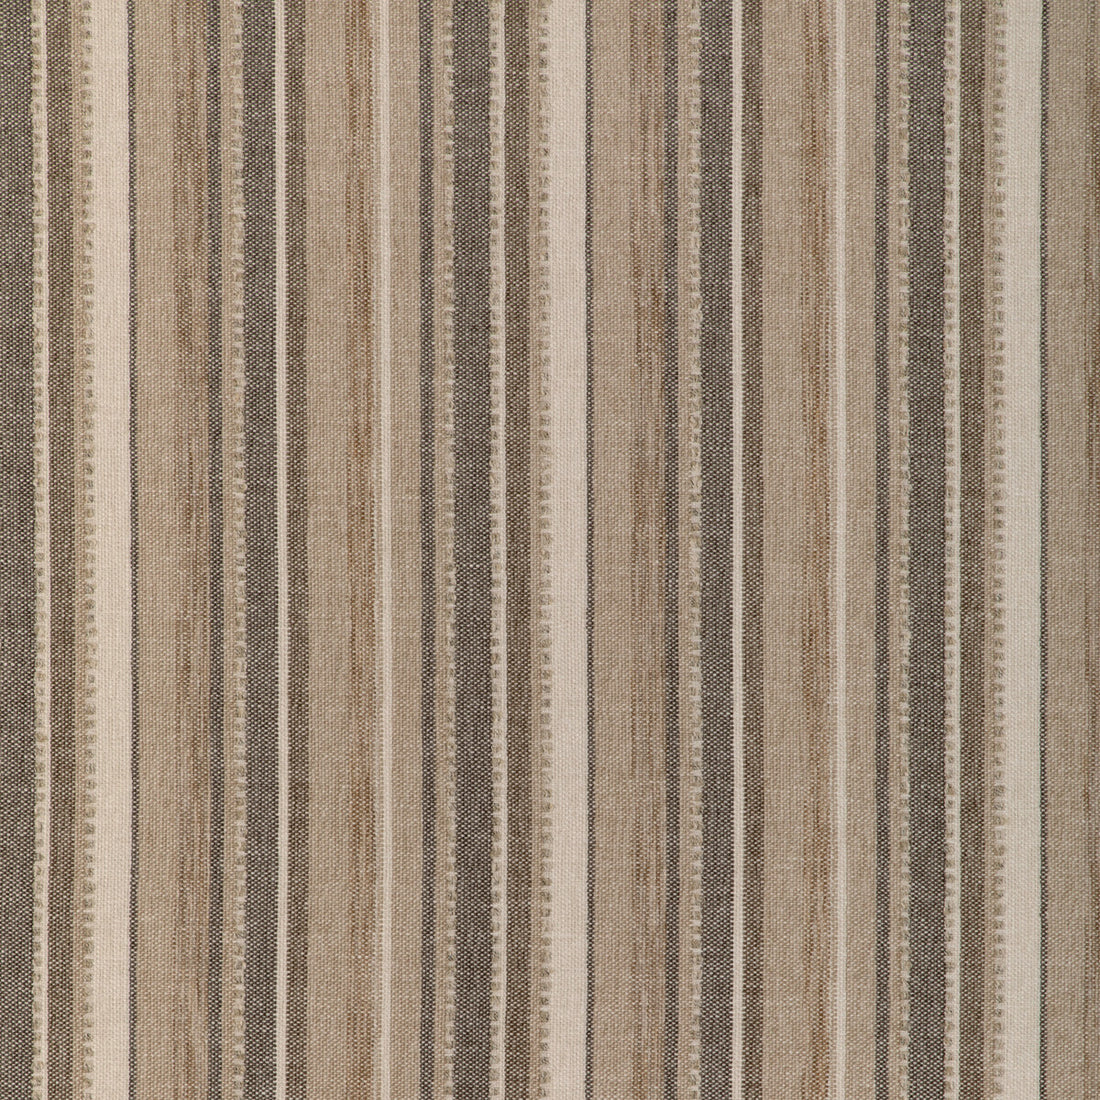 Kravet Design fabric in 37144-1611 color - pattern 37144.1611.0 - by Kravet Design in the Woven Colors collection